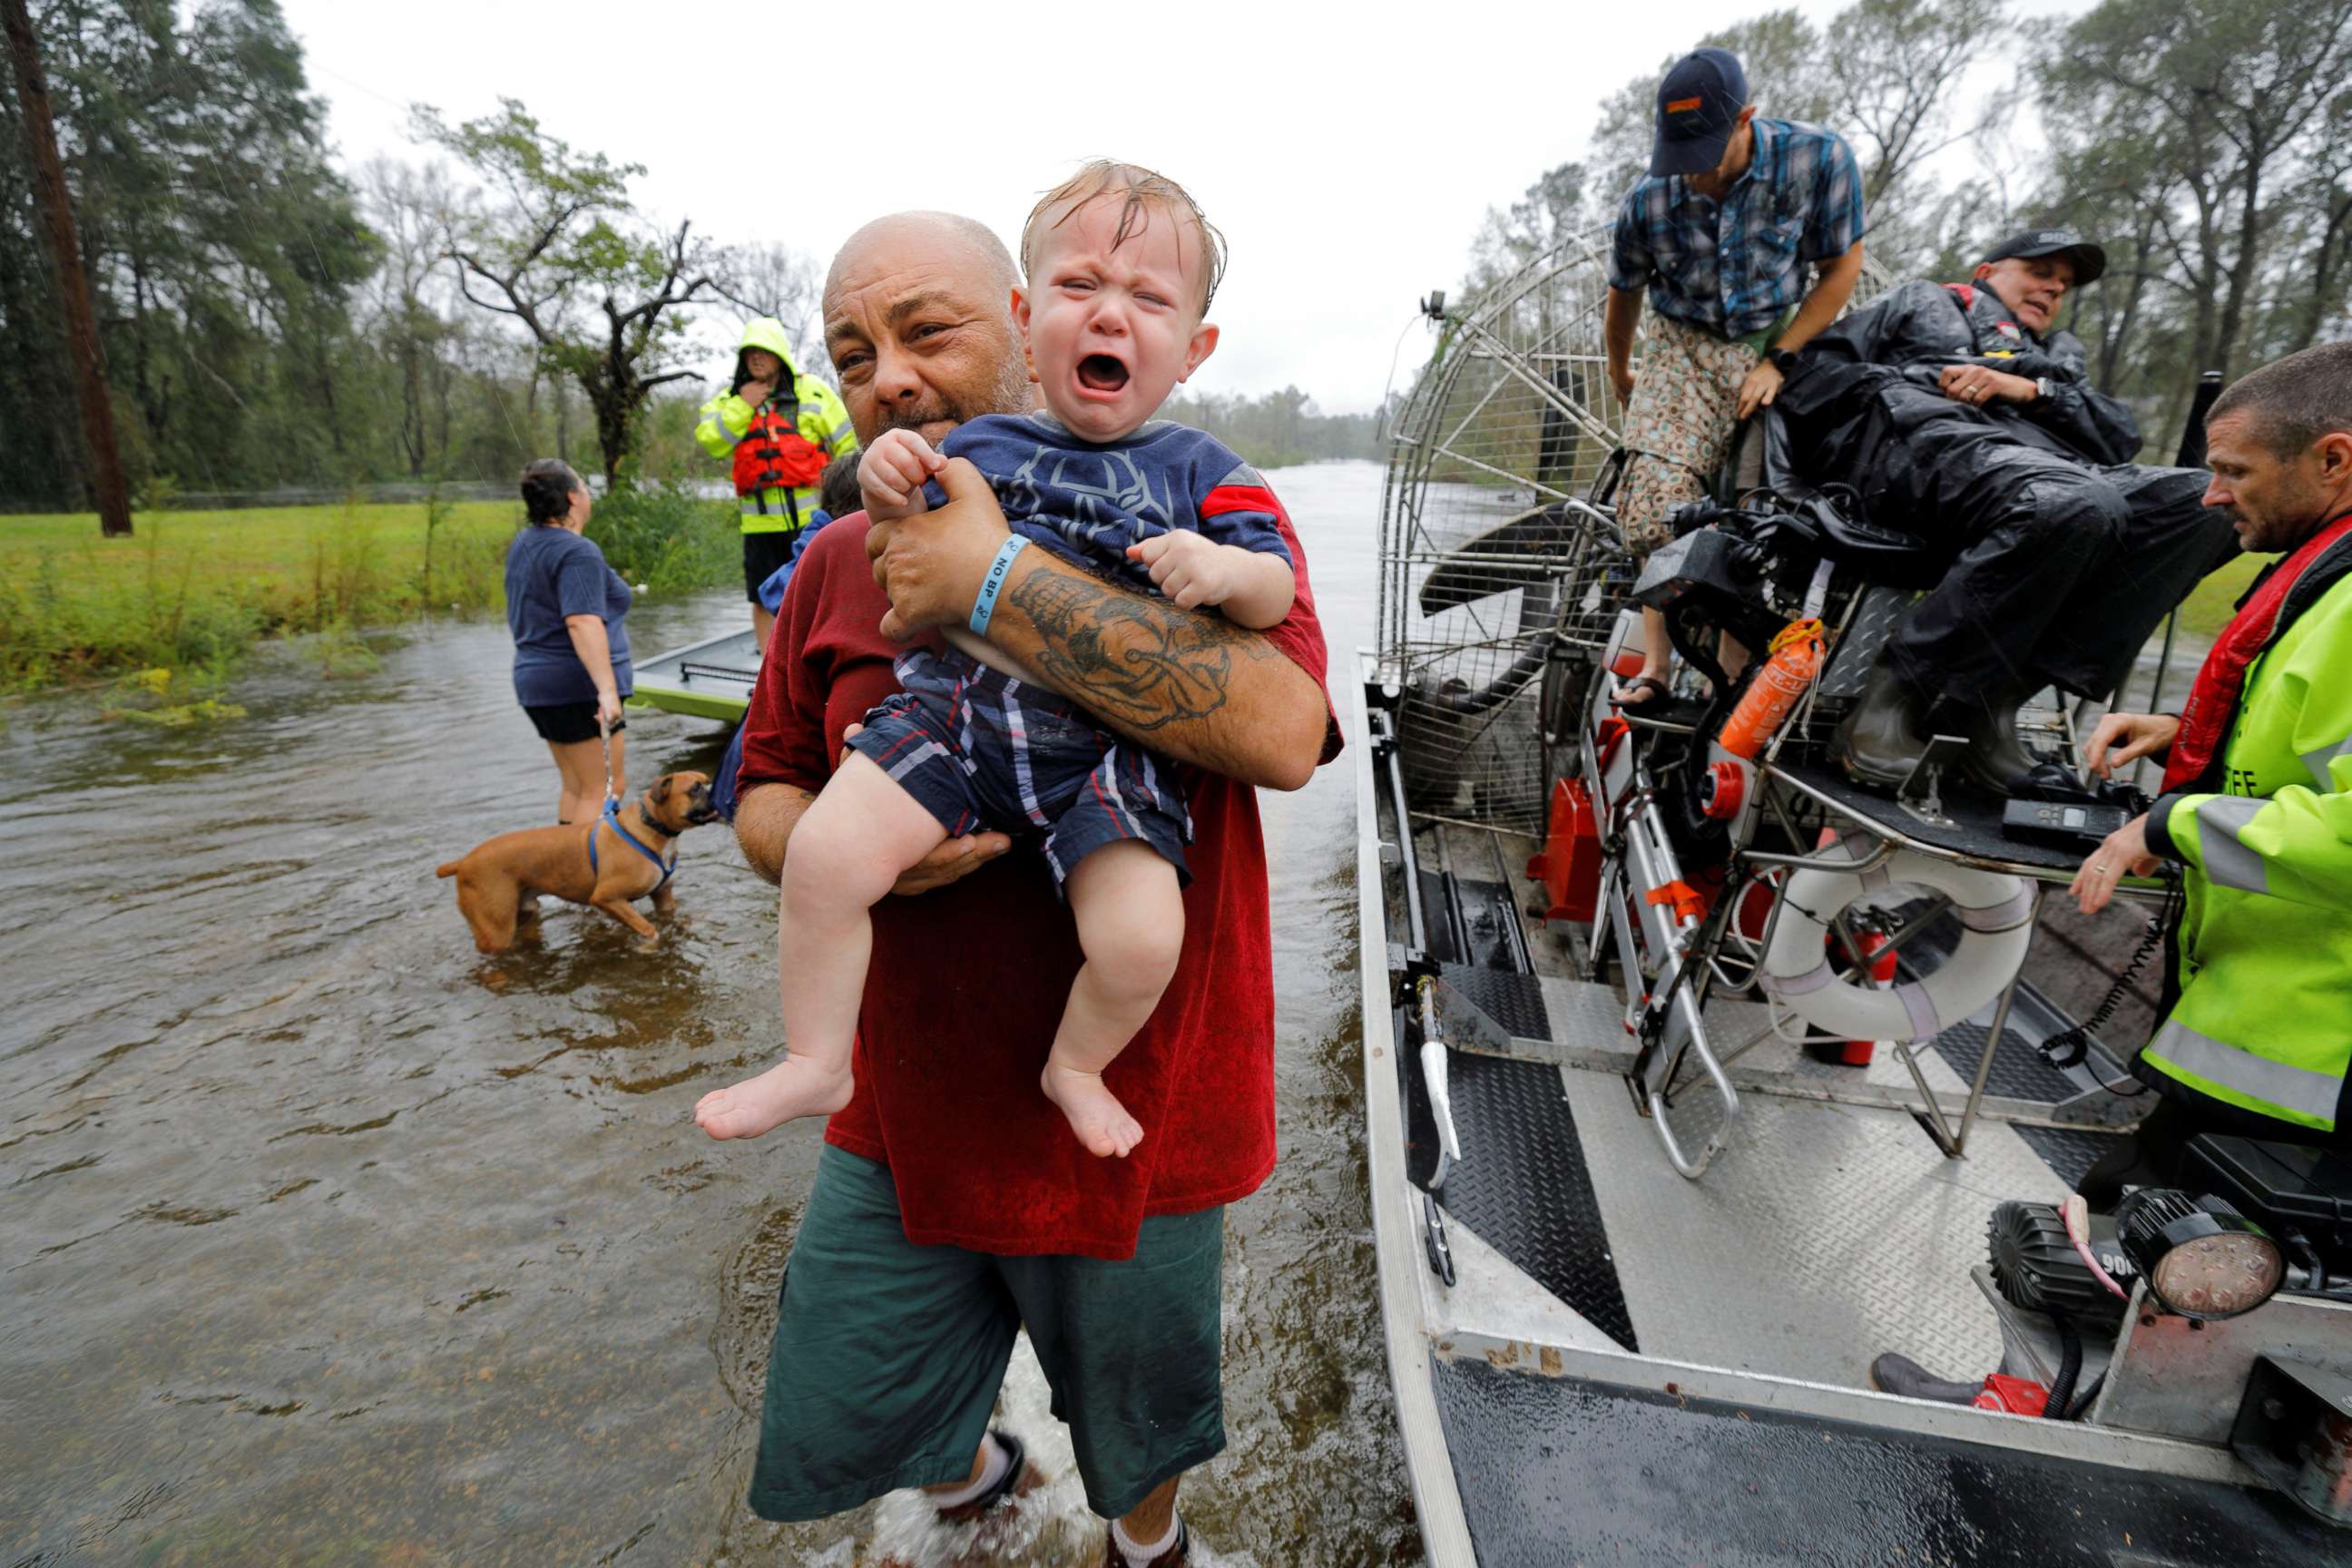 PHOTO: Oliver Kelly, 1, cries as he is carried off the sheriff's airboat during his rescue from rising flood waters in the aftermath of Hurricane Florence in Leland, North Carolina, Sept. 16, 2018.